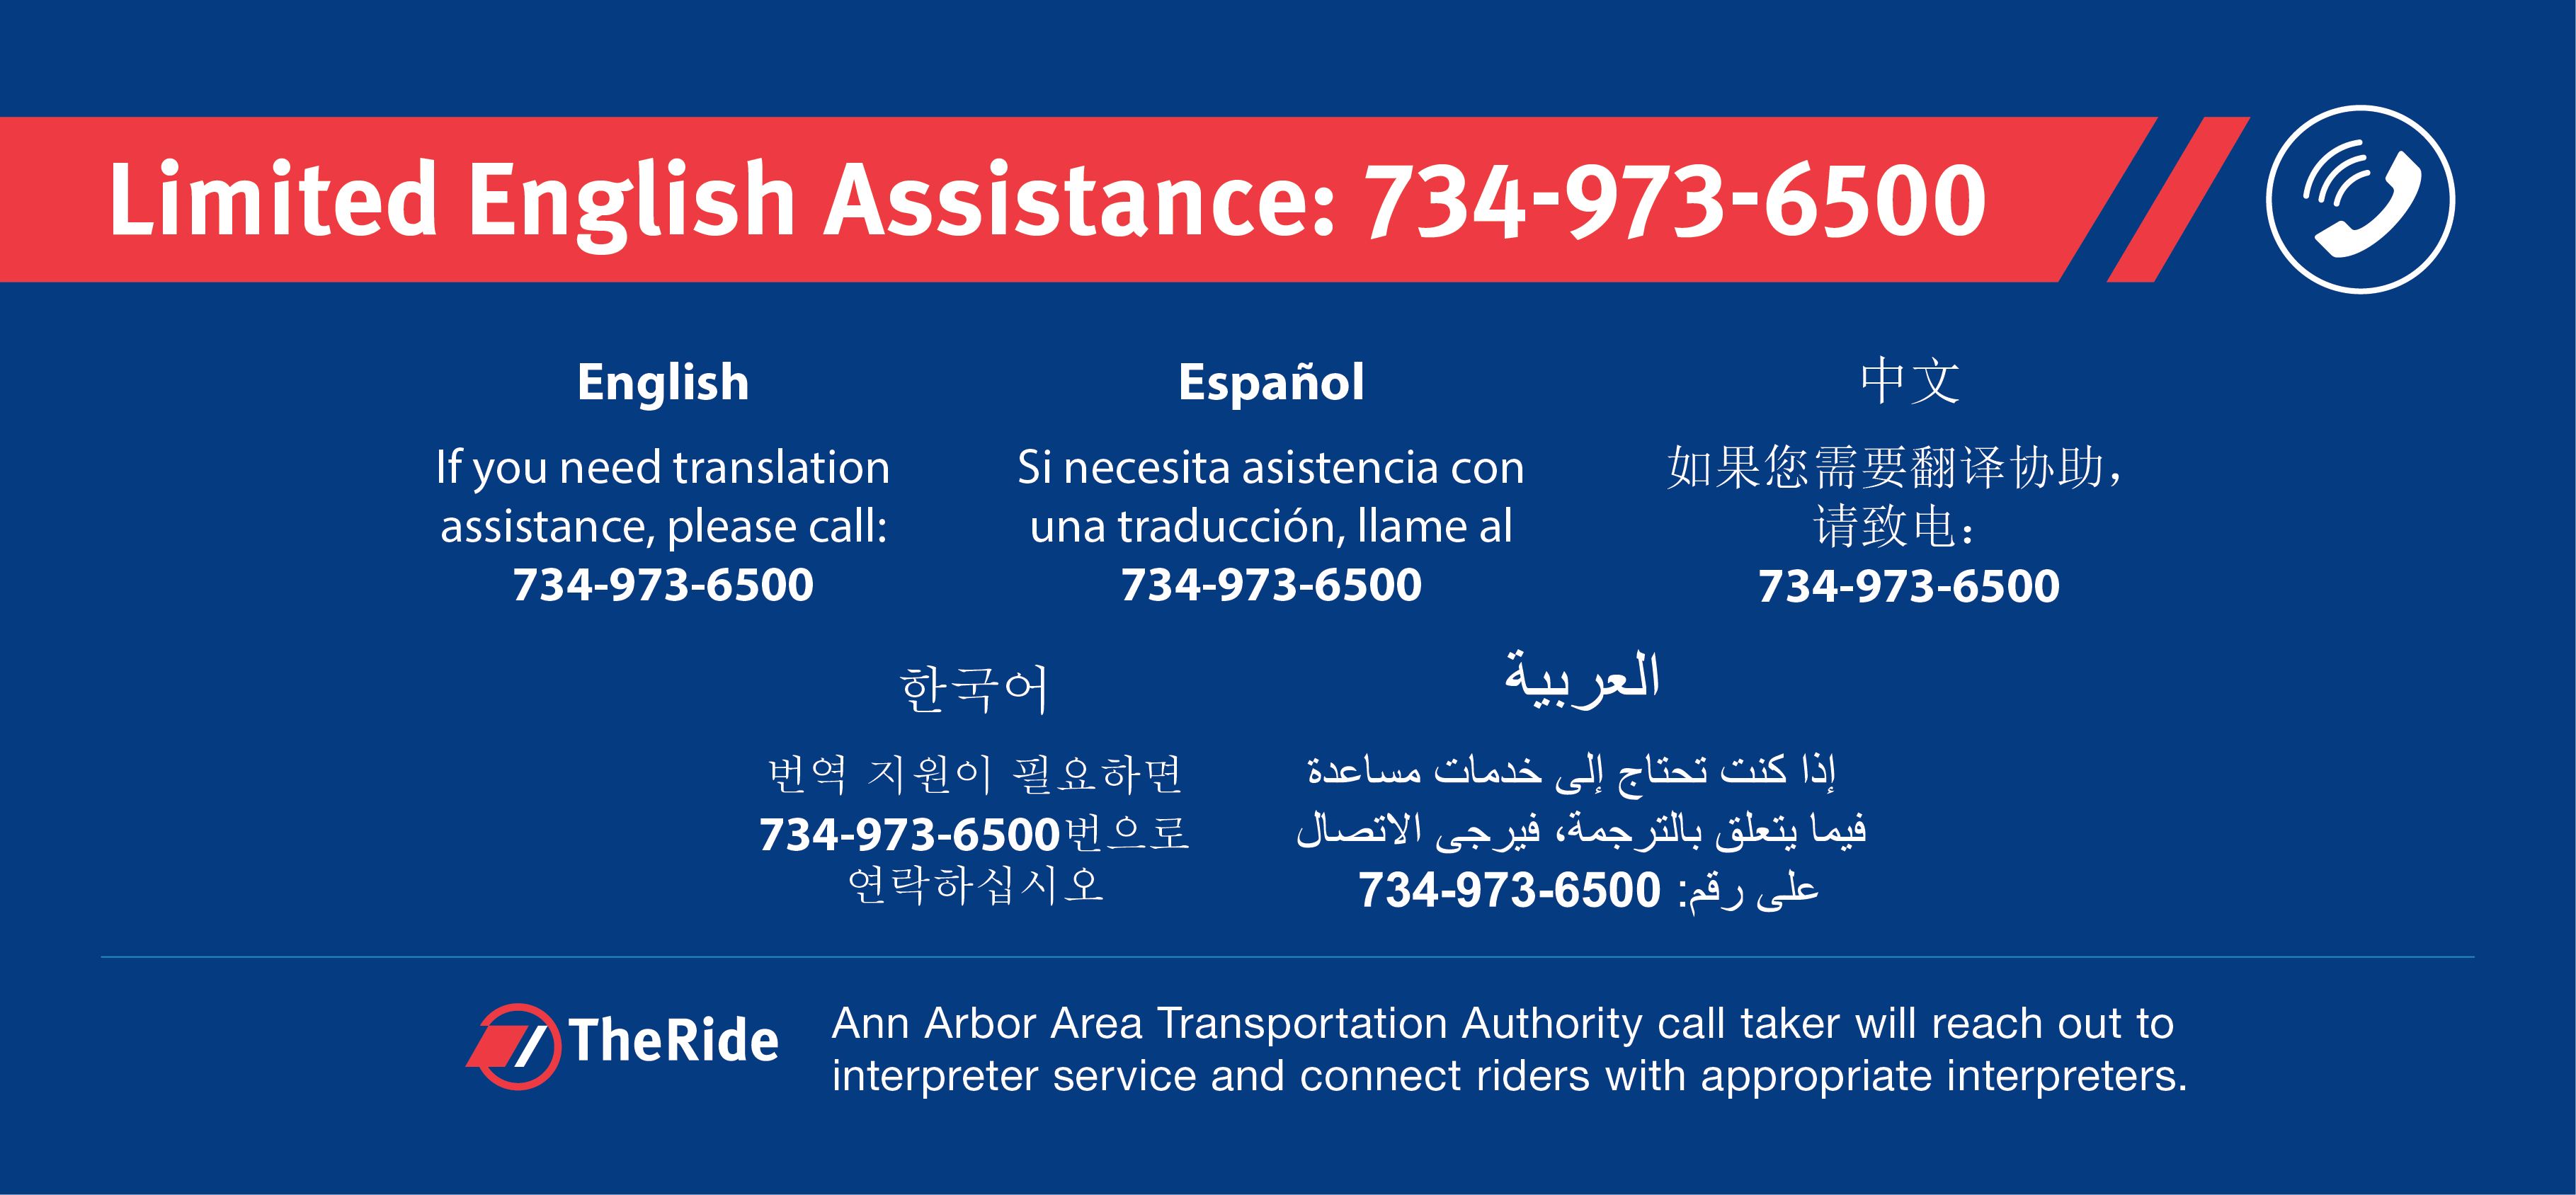 For translation assistance, please call 734-973-6500